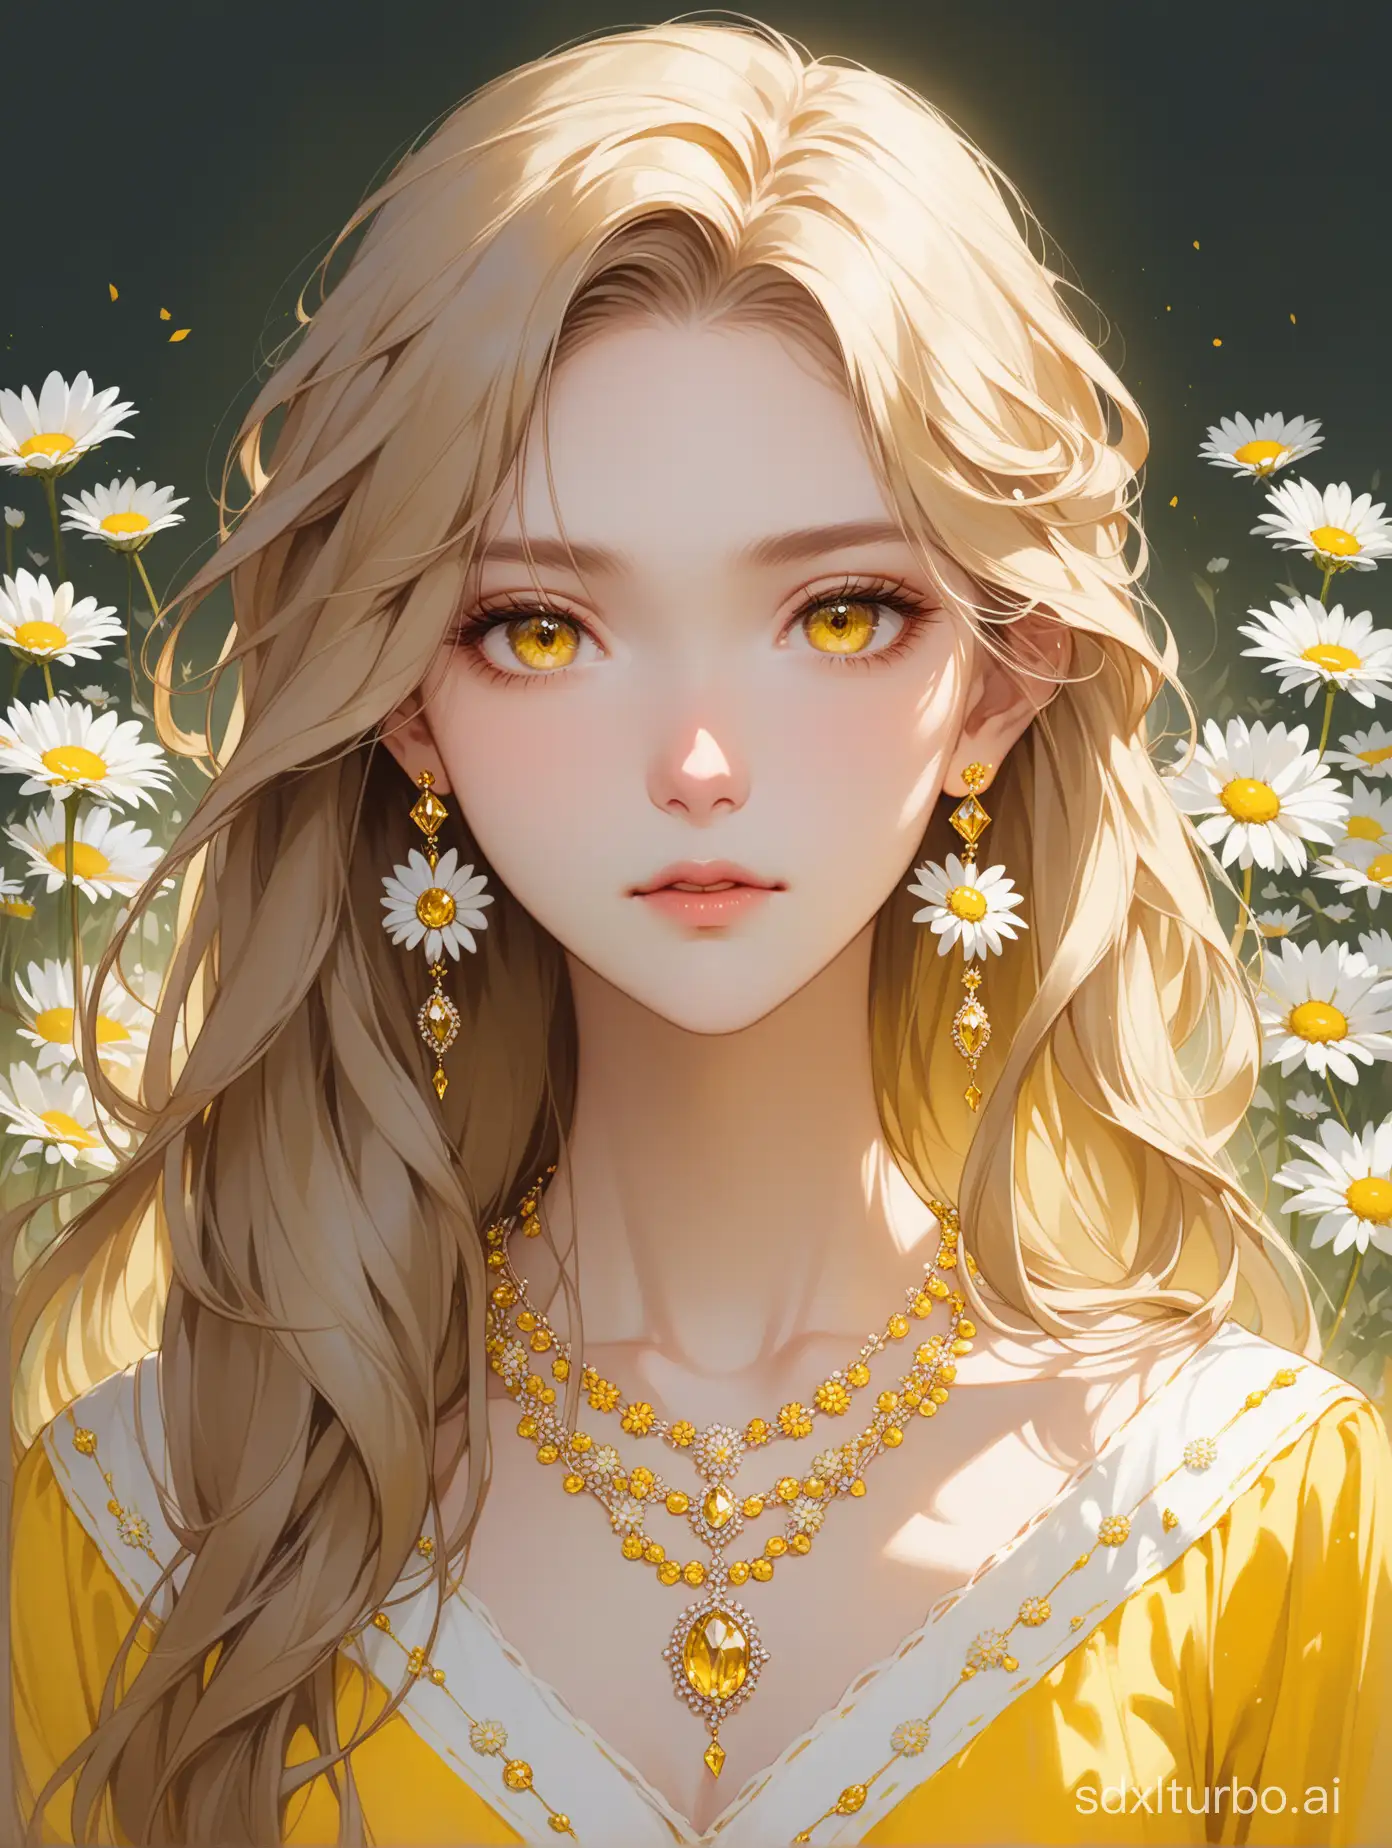 Exquisite-Portrait-of-a-Girl-with-Light-Brown-Hair-and-Yellow-Accessories-Surrounded-by-Daisies